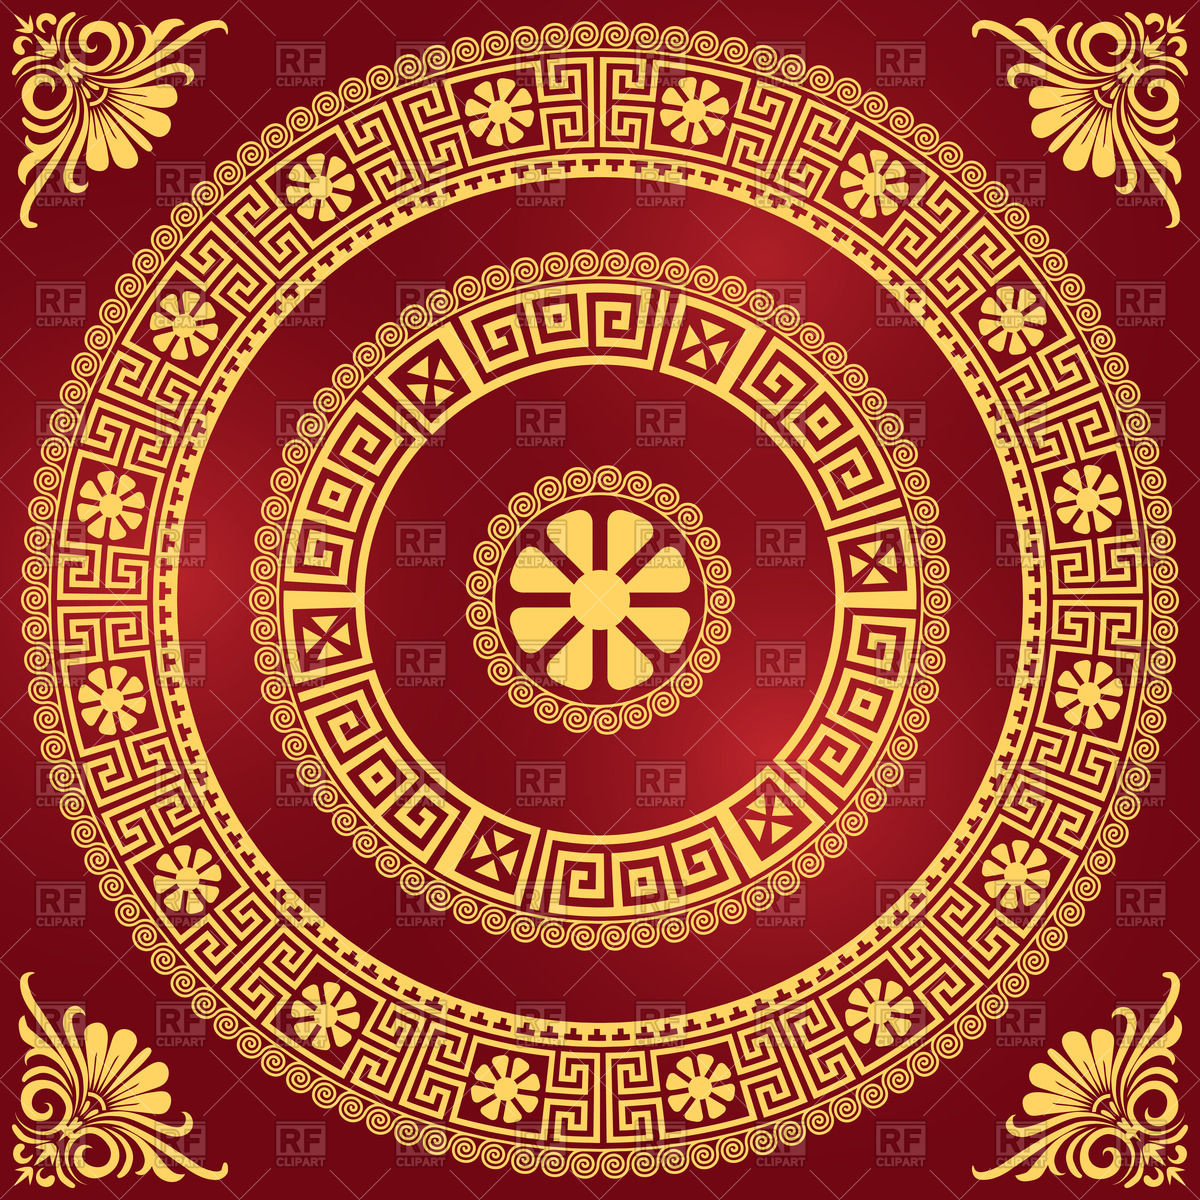 Gold Greek Ornament Meander And Floral Pattern On A Red Background